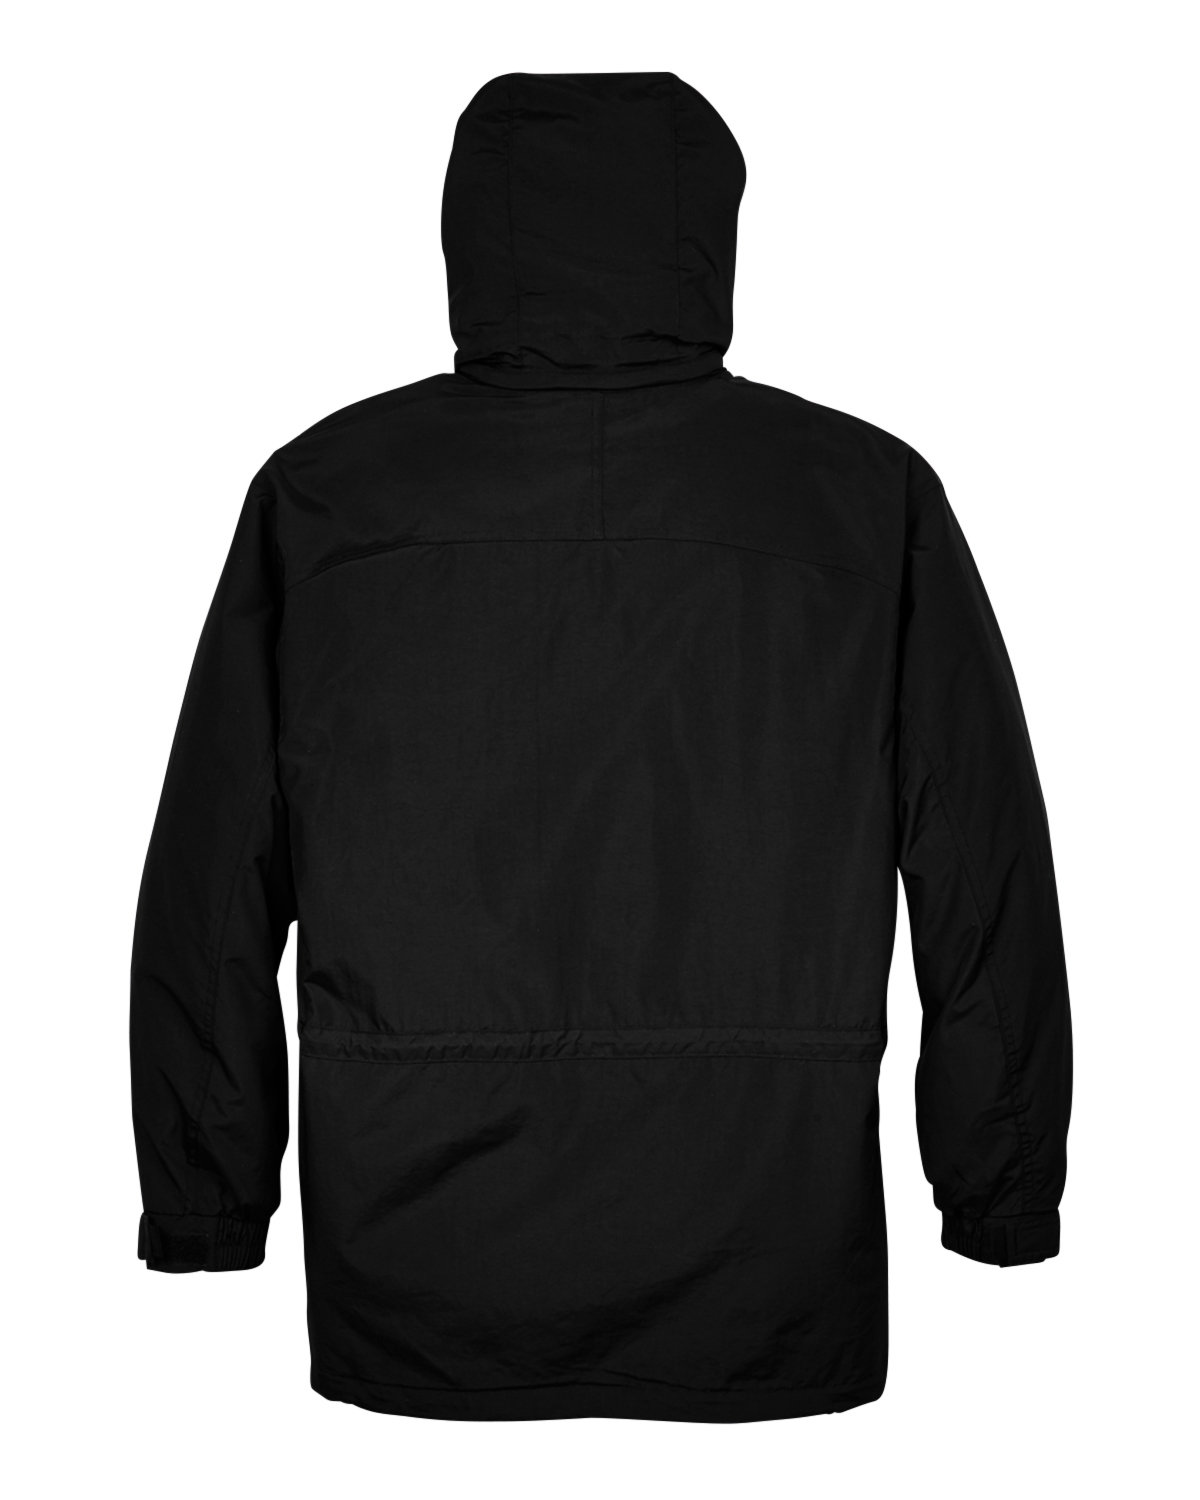 North End Adult 3-in-1 Parka with Dobby Trim | alphabroder